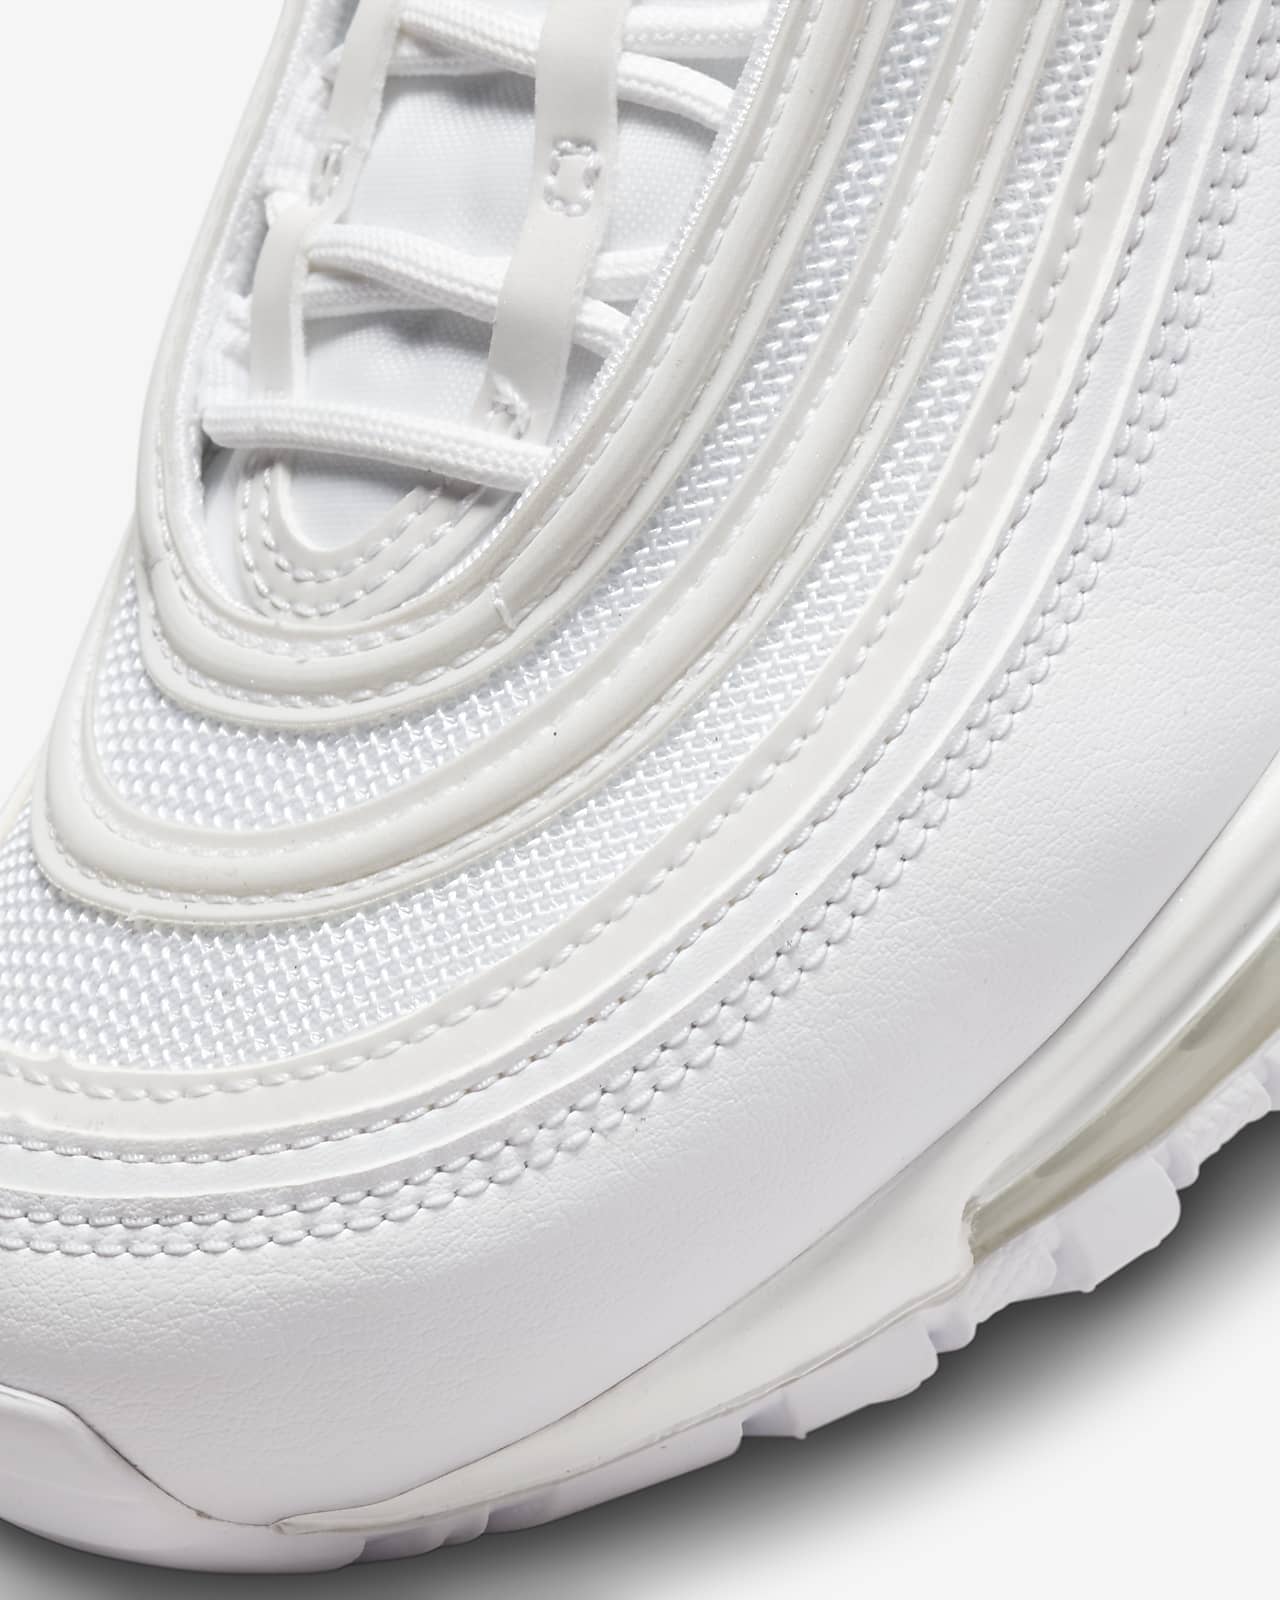 Nike Air Max 97 sneakers in white